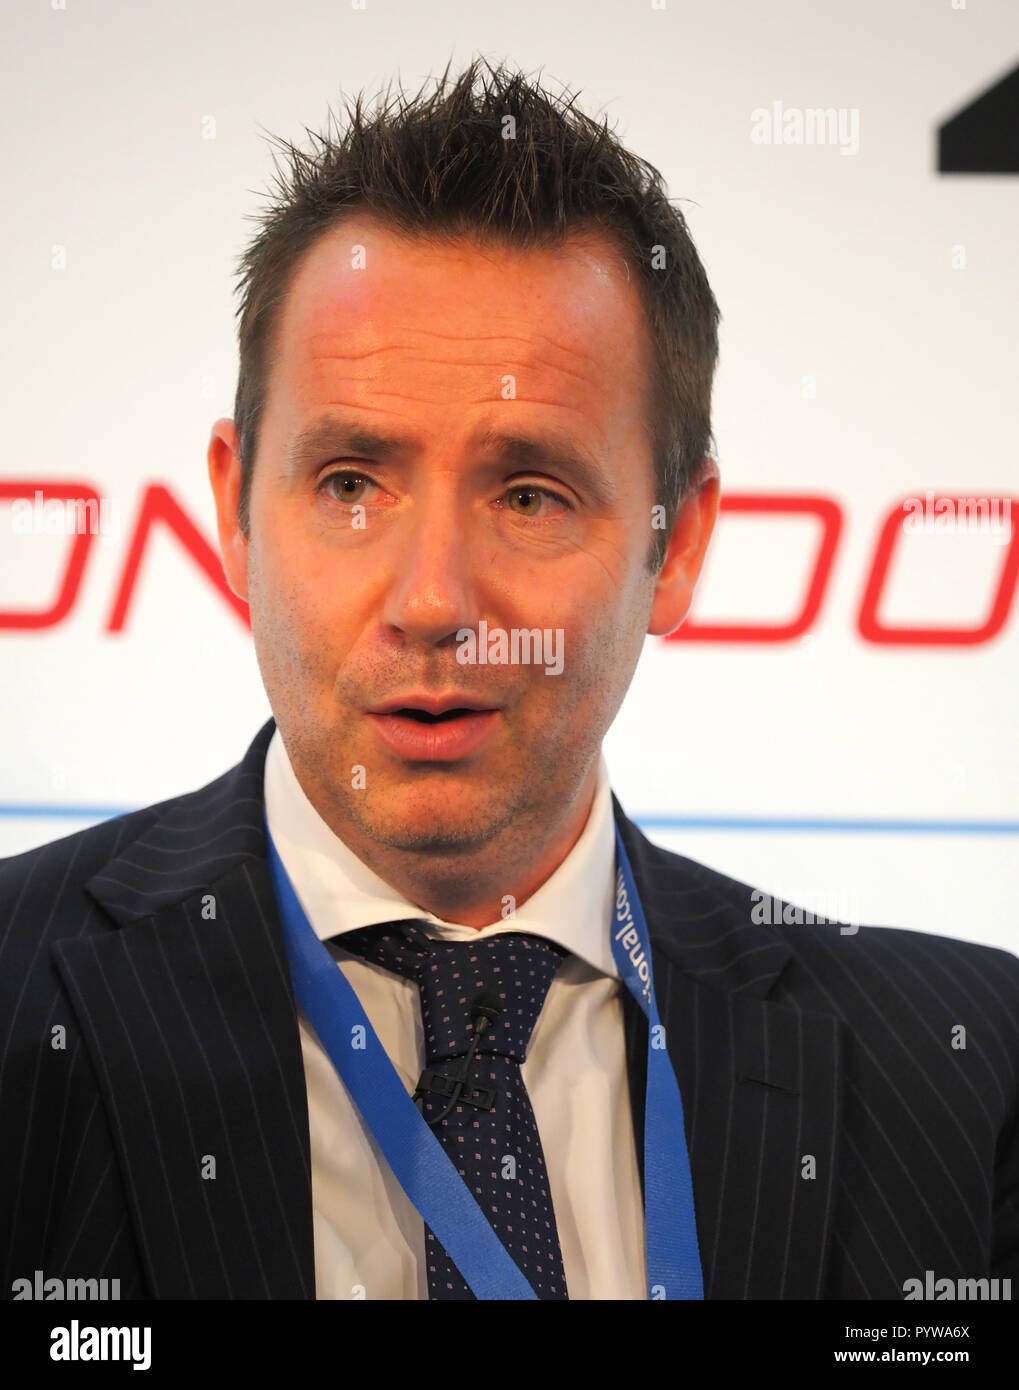 London, UK. 30th Oct, 2018. Al Titherington, Managing Director, Cornwall Airport Newquay, speaking at the Airport Operators Conference being held at County Hall, London today (Tues) Credit: Finnbarr Webster/Alamy Live News Stock Photo